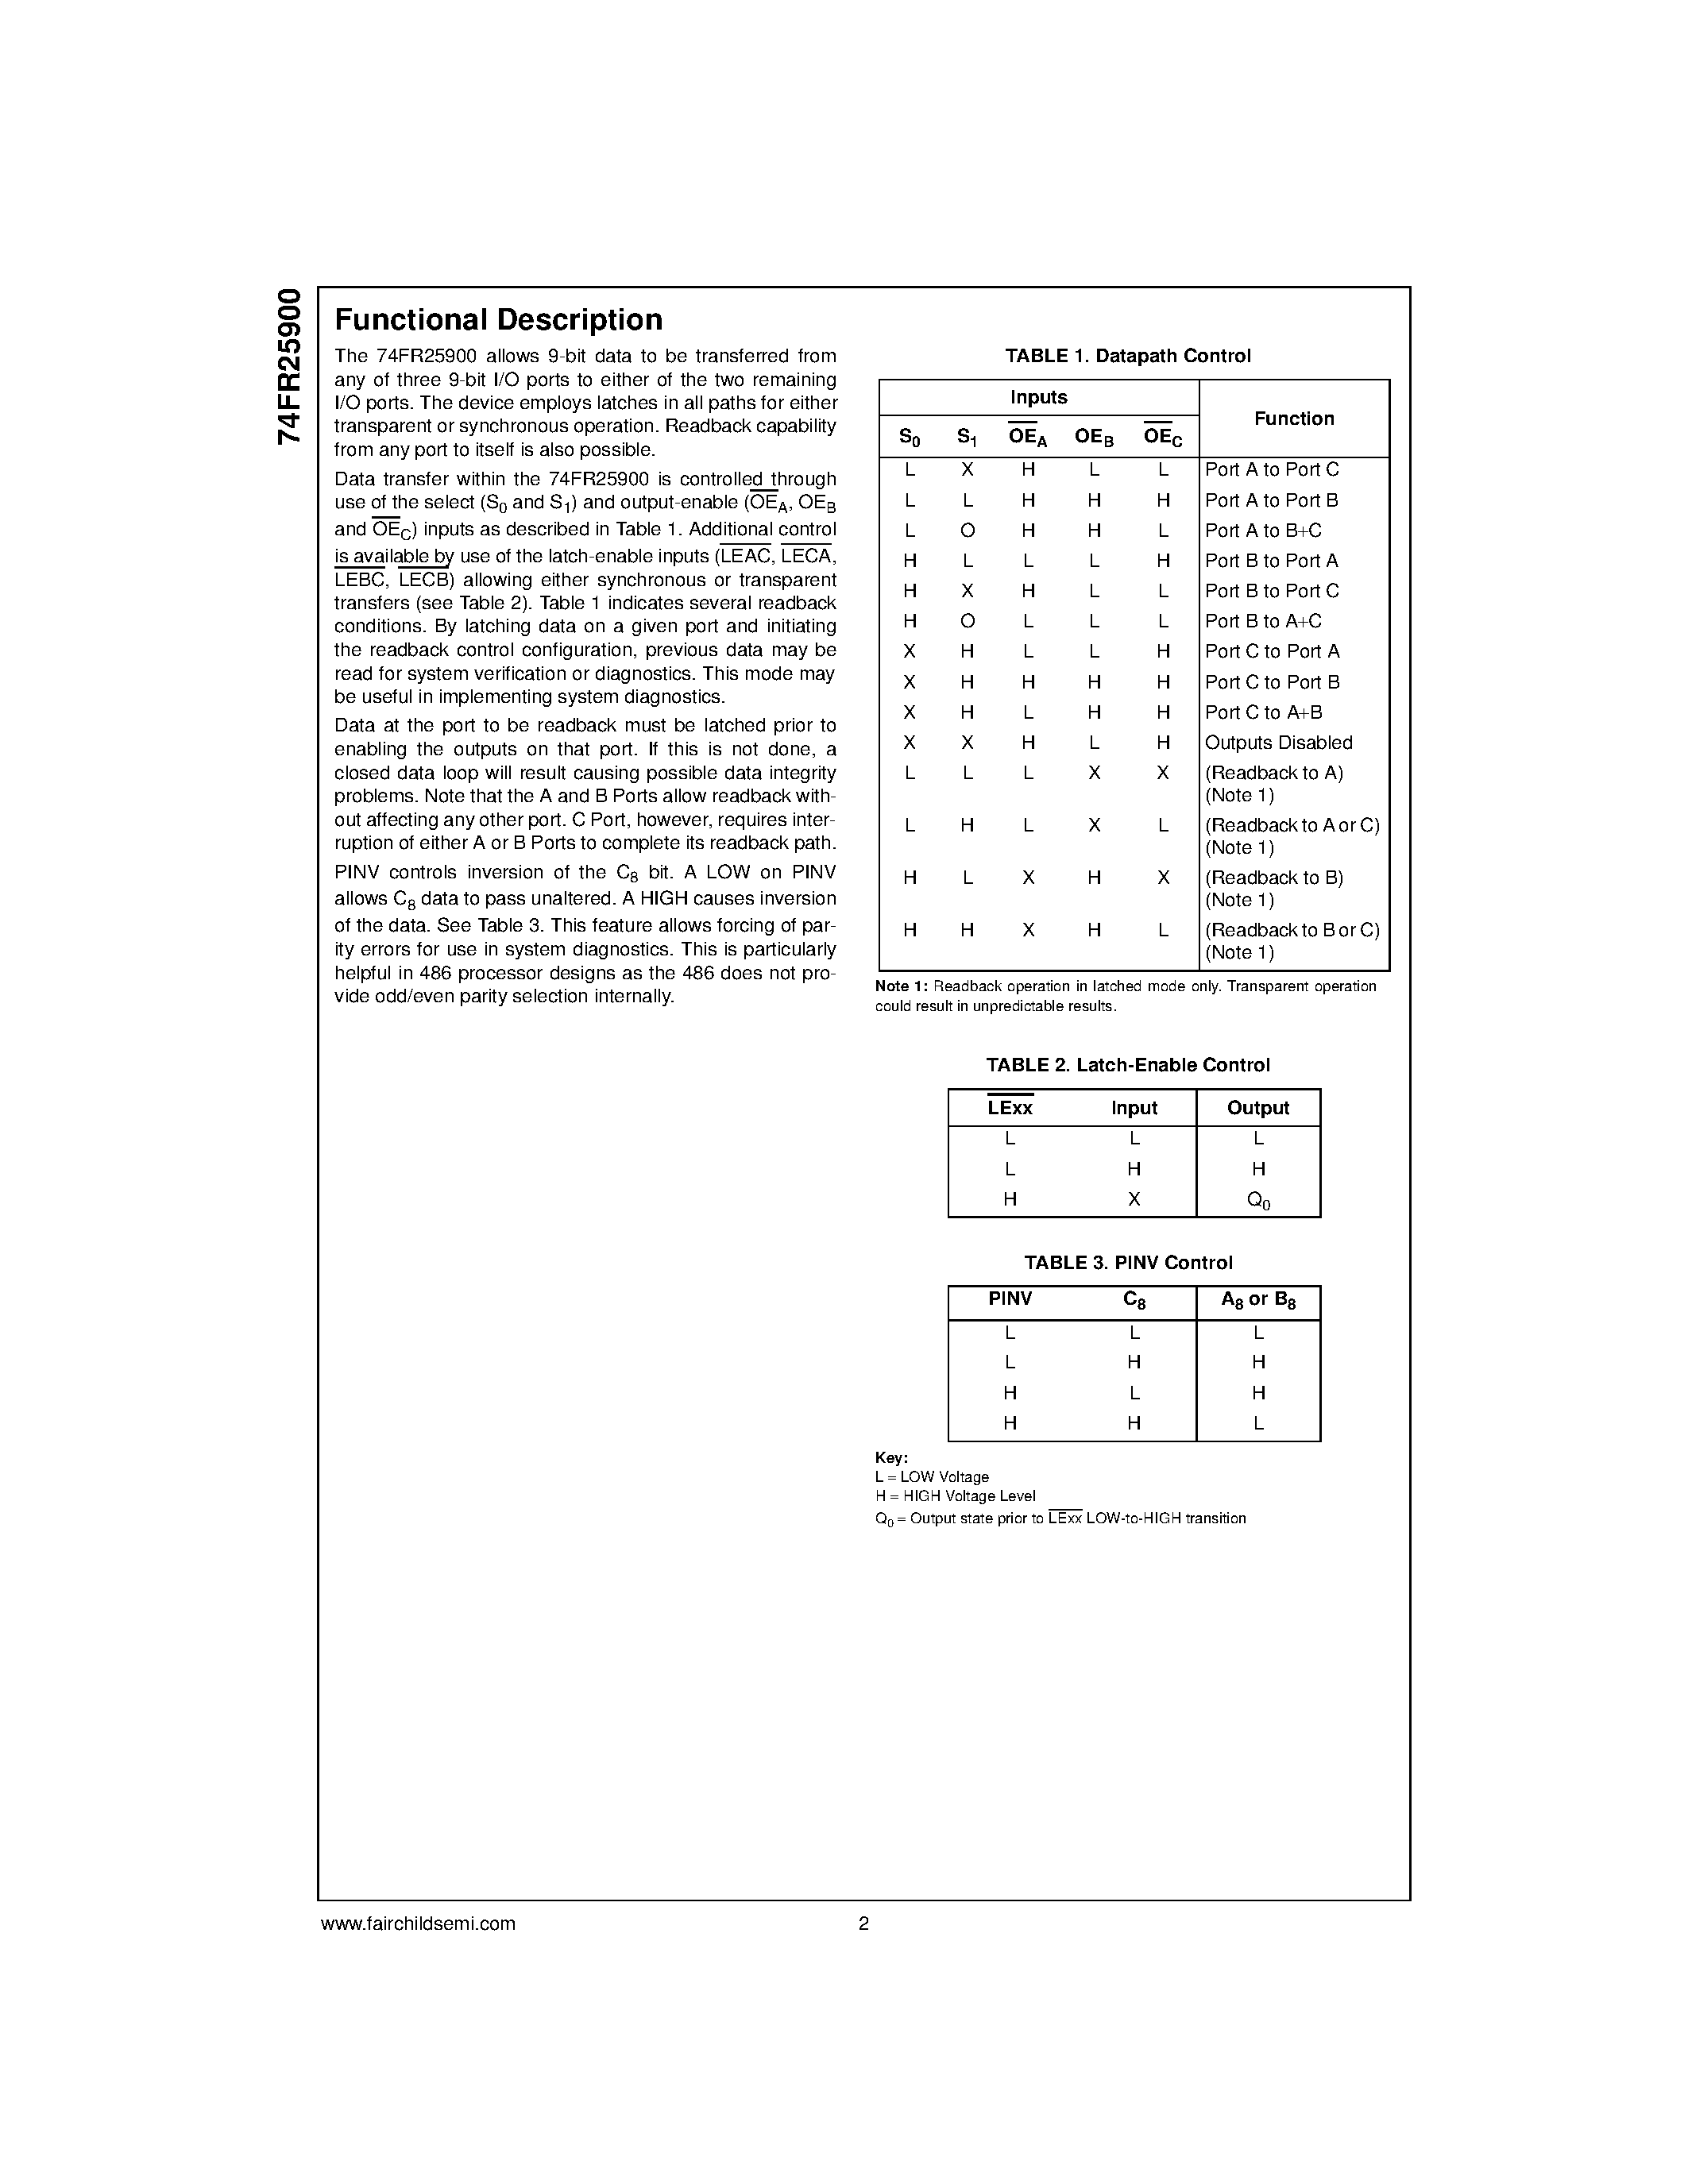 Datasheet 74FR25900SSC - 9-Bit / 3-Port Latchable Datapath Multiplexer with 25W Output Series Resistors page 2